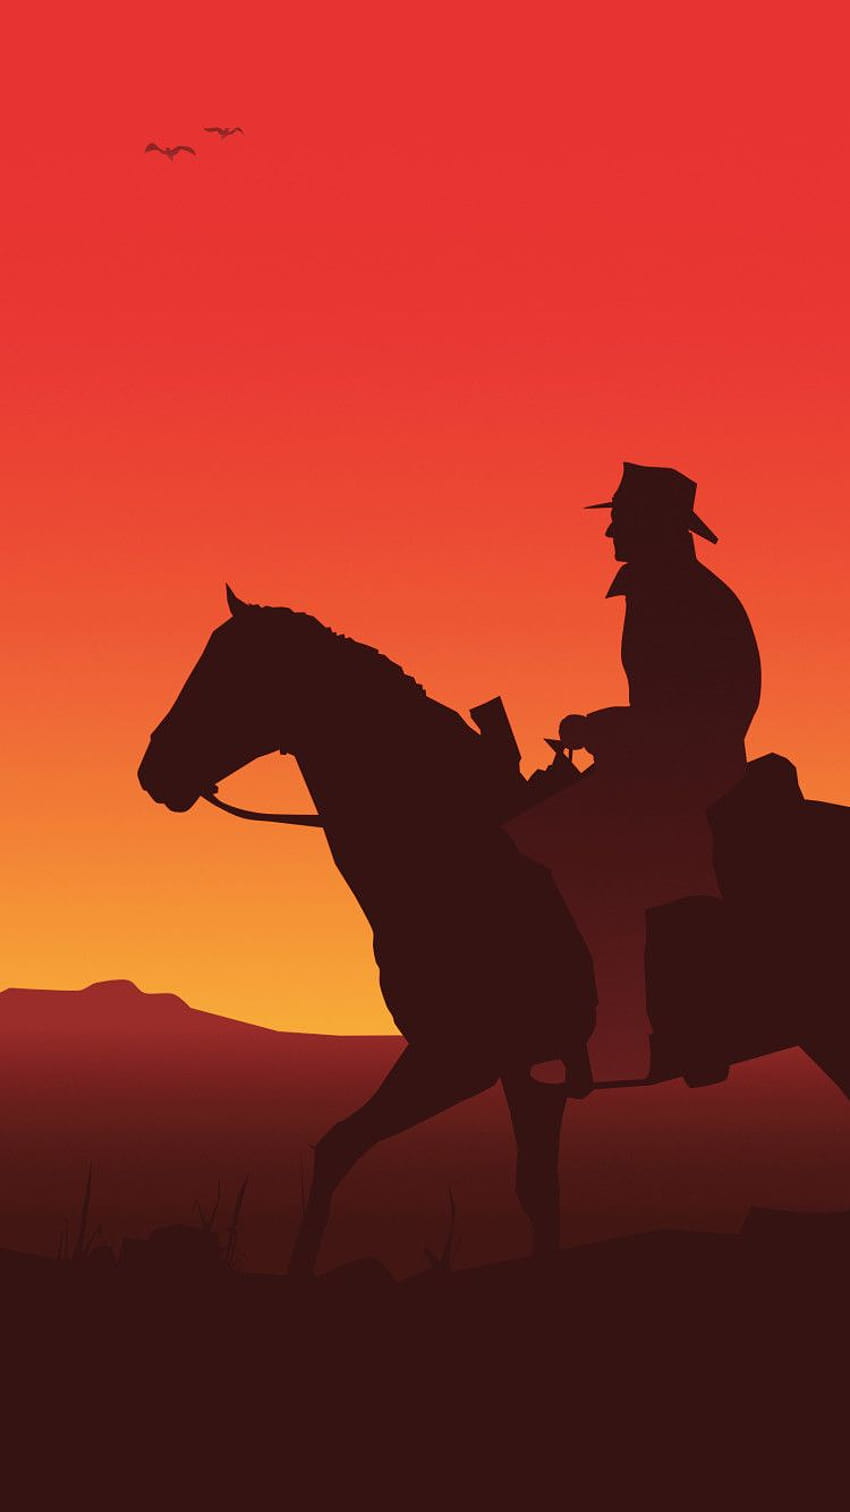 750x1334 Red Dead Redemption 2 Illustration iPhone 6, iPhone 6S, Red Dead Redemption 2 iPhone Fond d'écran de téléphone HD